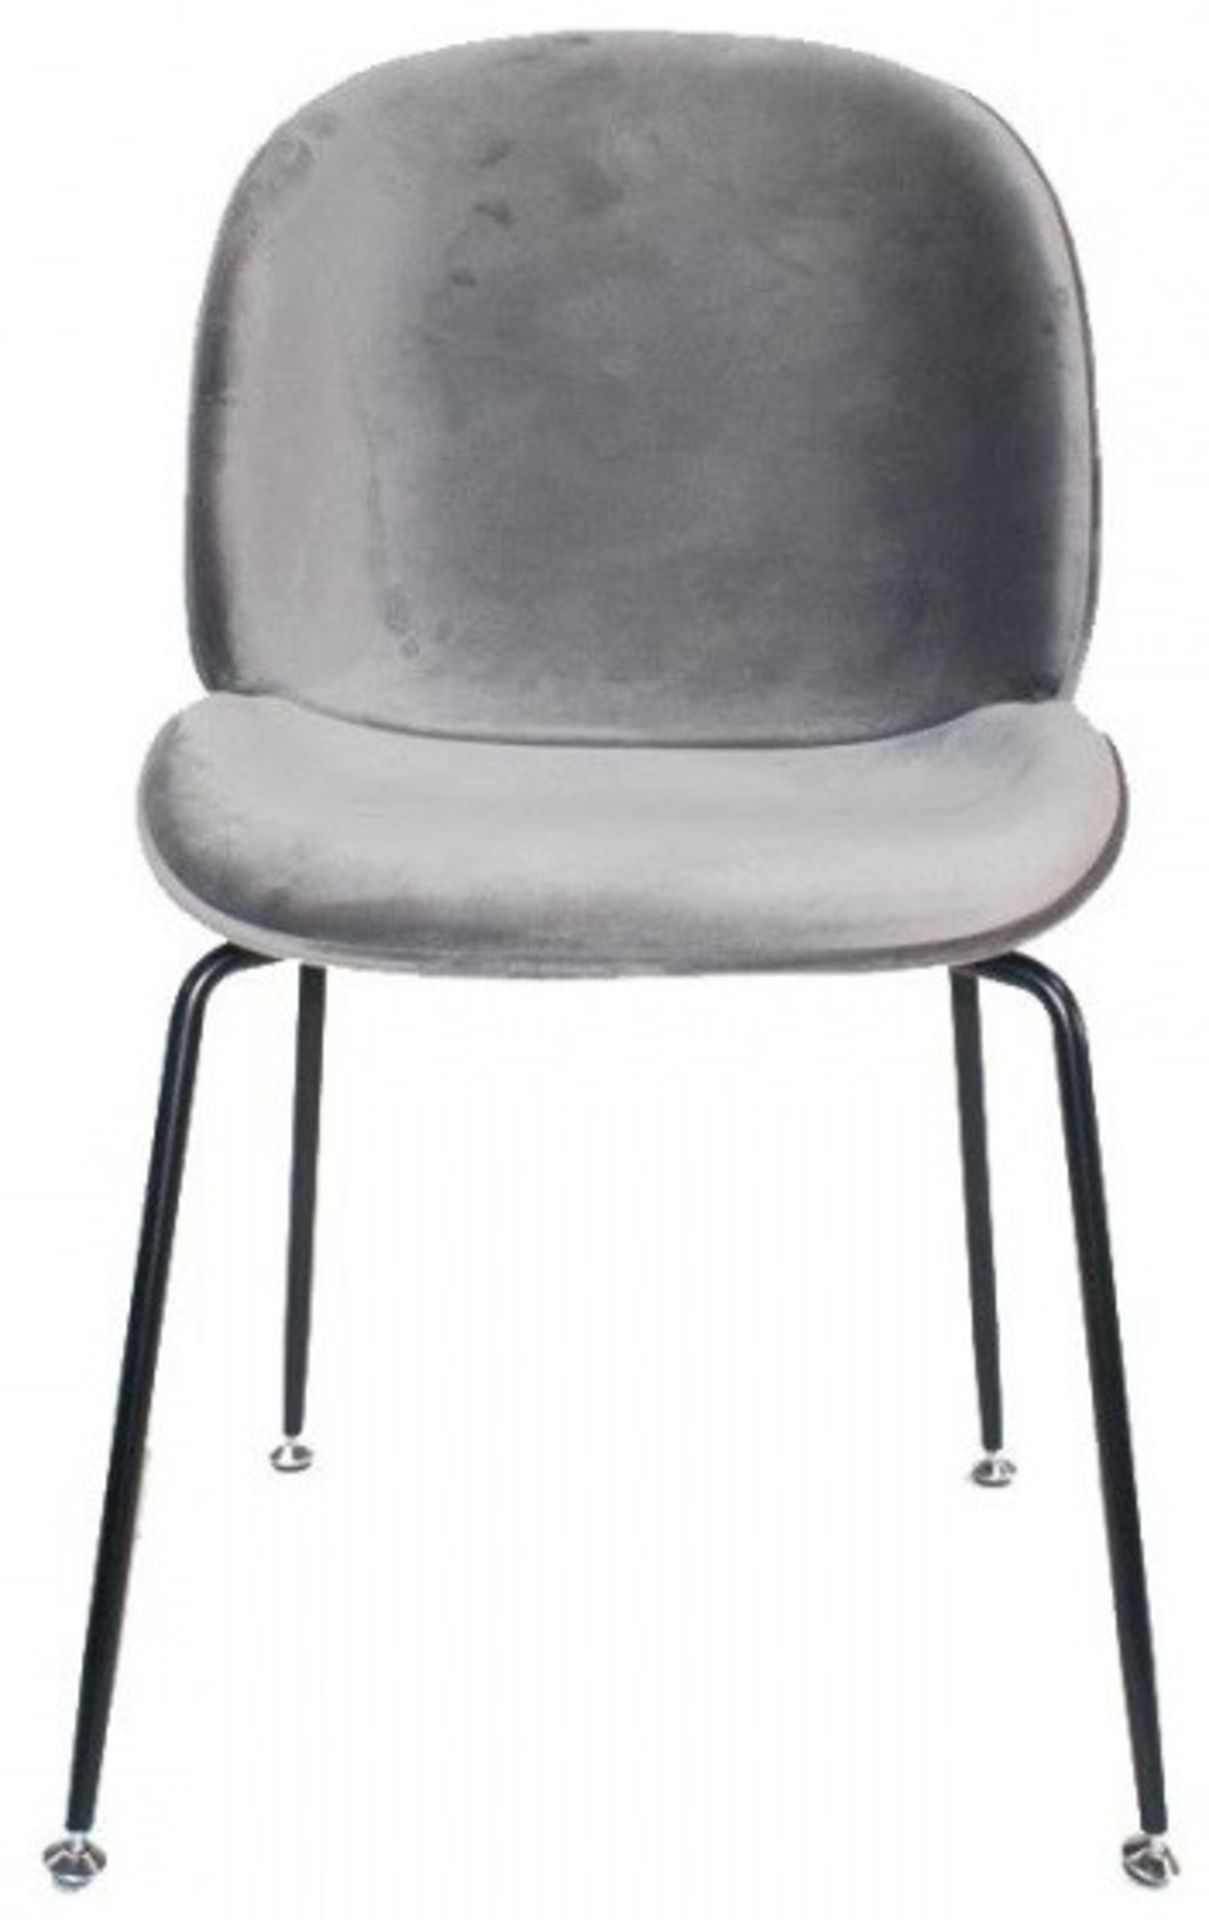 4 x GRACE Upholstered Contemporary Dining Chairs In Grey Velvet - Dimensions: W48 x D50 x H85 cm - Image 3 of 3